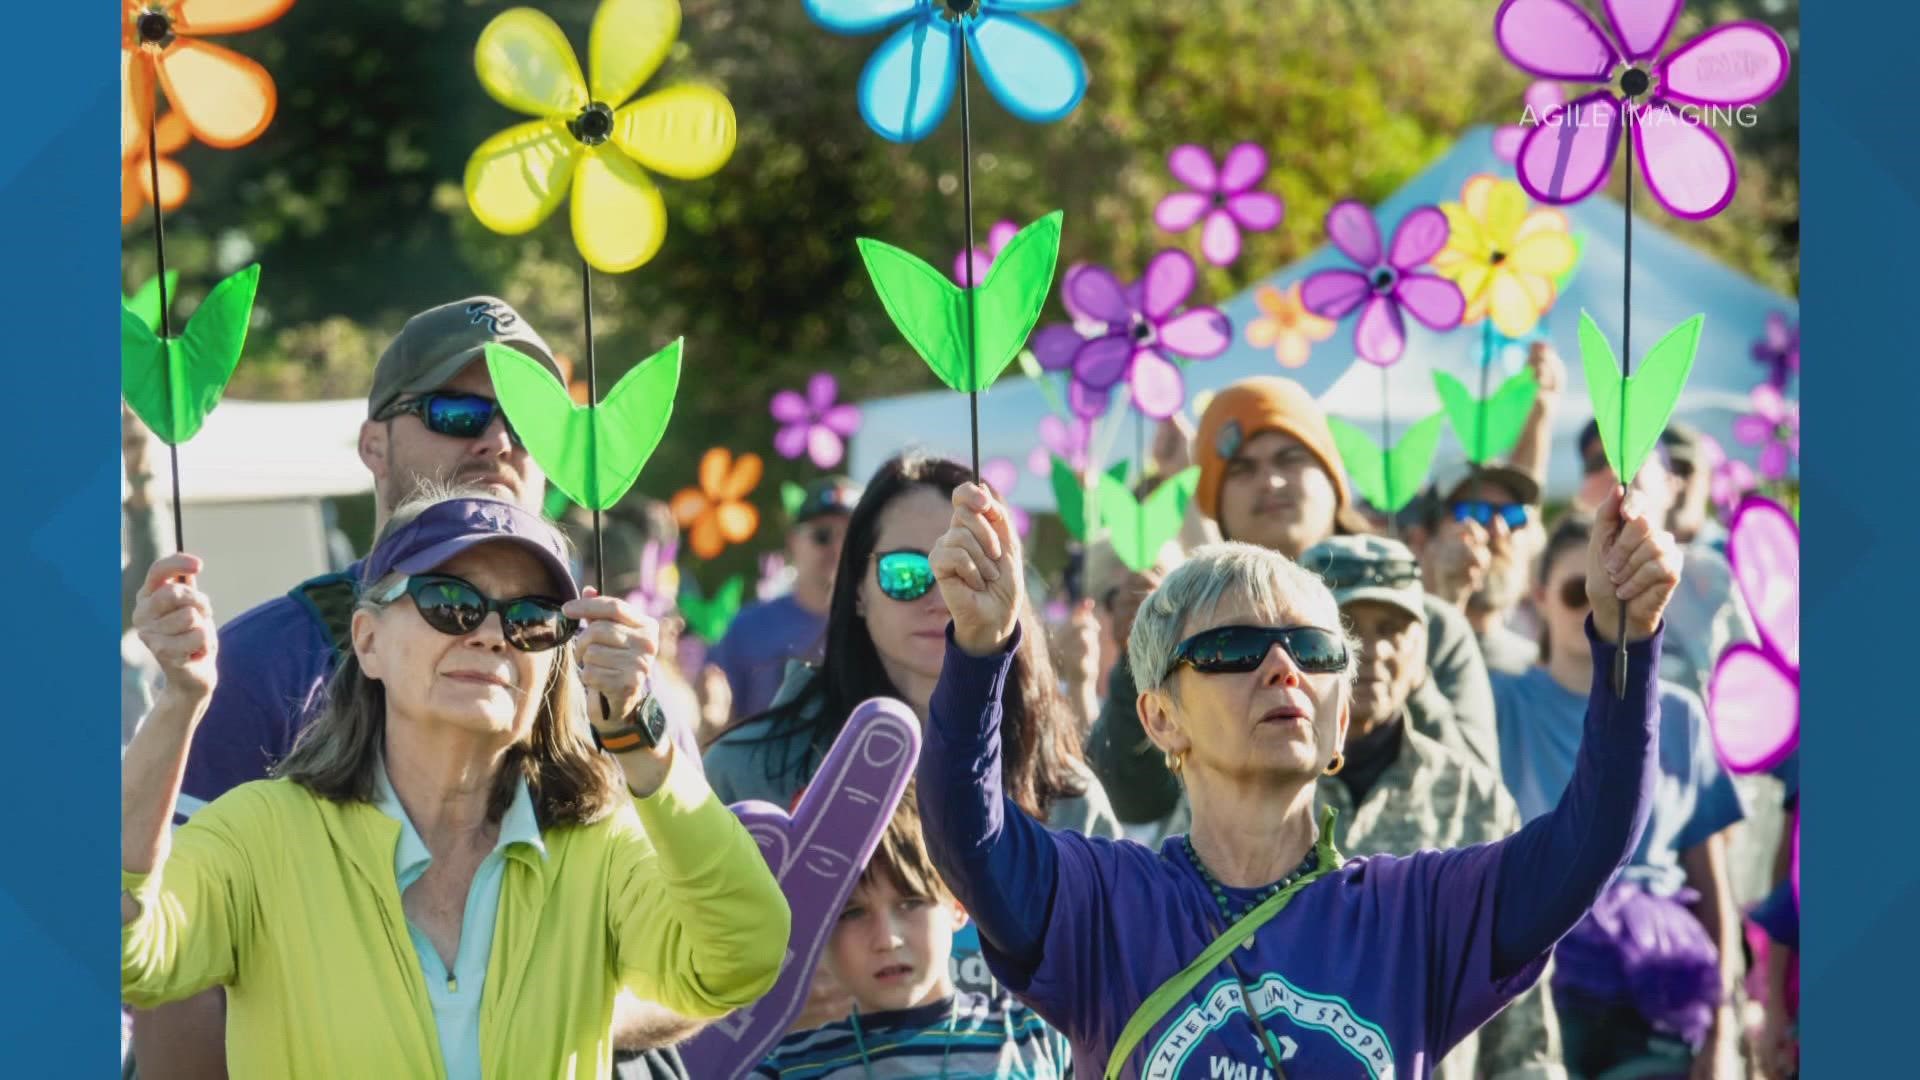 The 2022 Walk to End Alzheimer's is happening Saturday, September 17 at Denver's City Park. Money raised helps support programs, services and research.